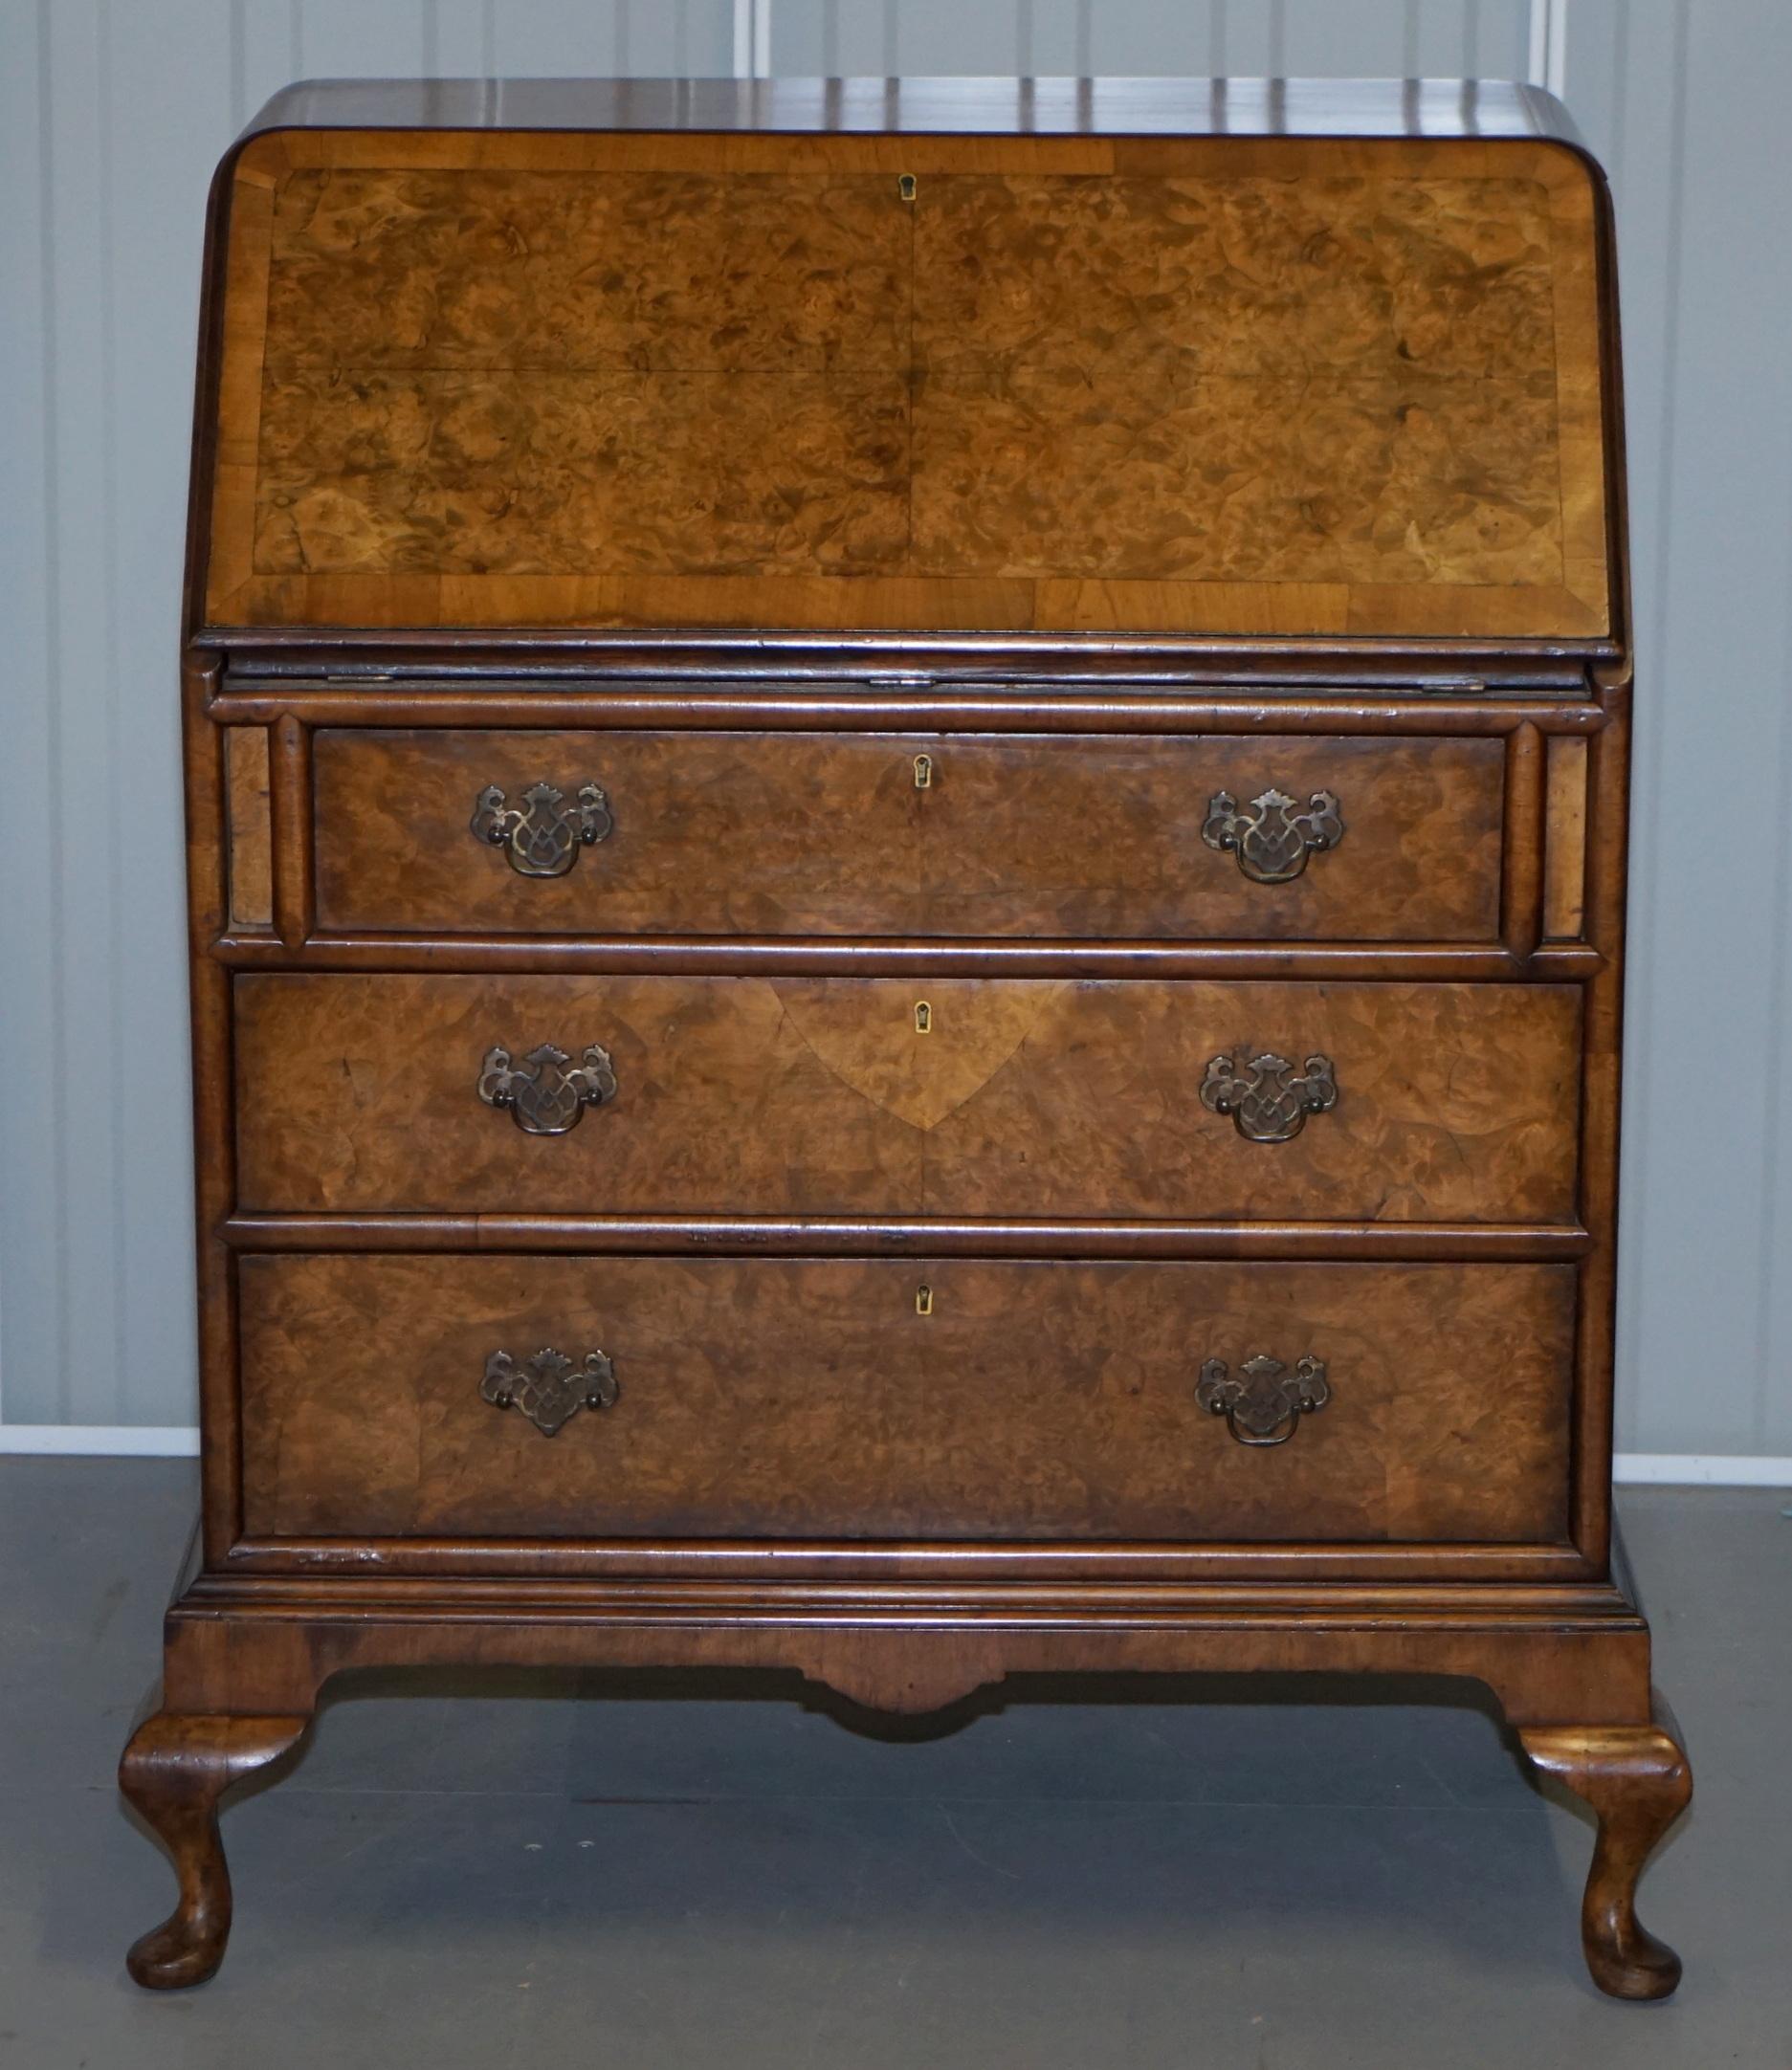 We are delighted to offer for sale this lovely vintage Edwardian burr walnut writing bureau with drop front brown leather writing surface

A good looking well made and decorative piece, the burr walnut timber patina is simply glorious, I love it